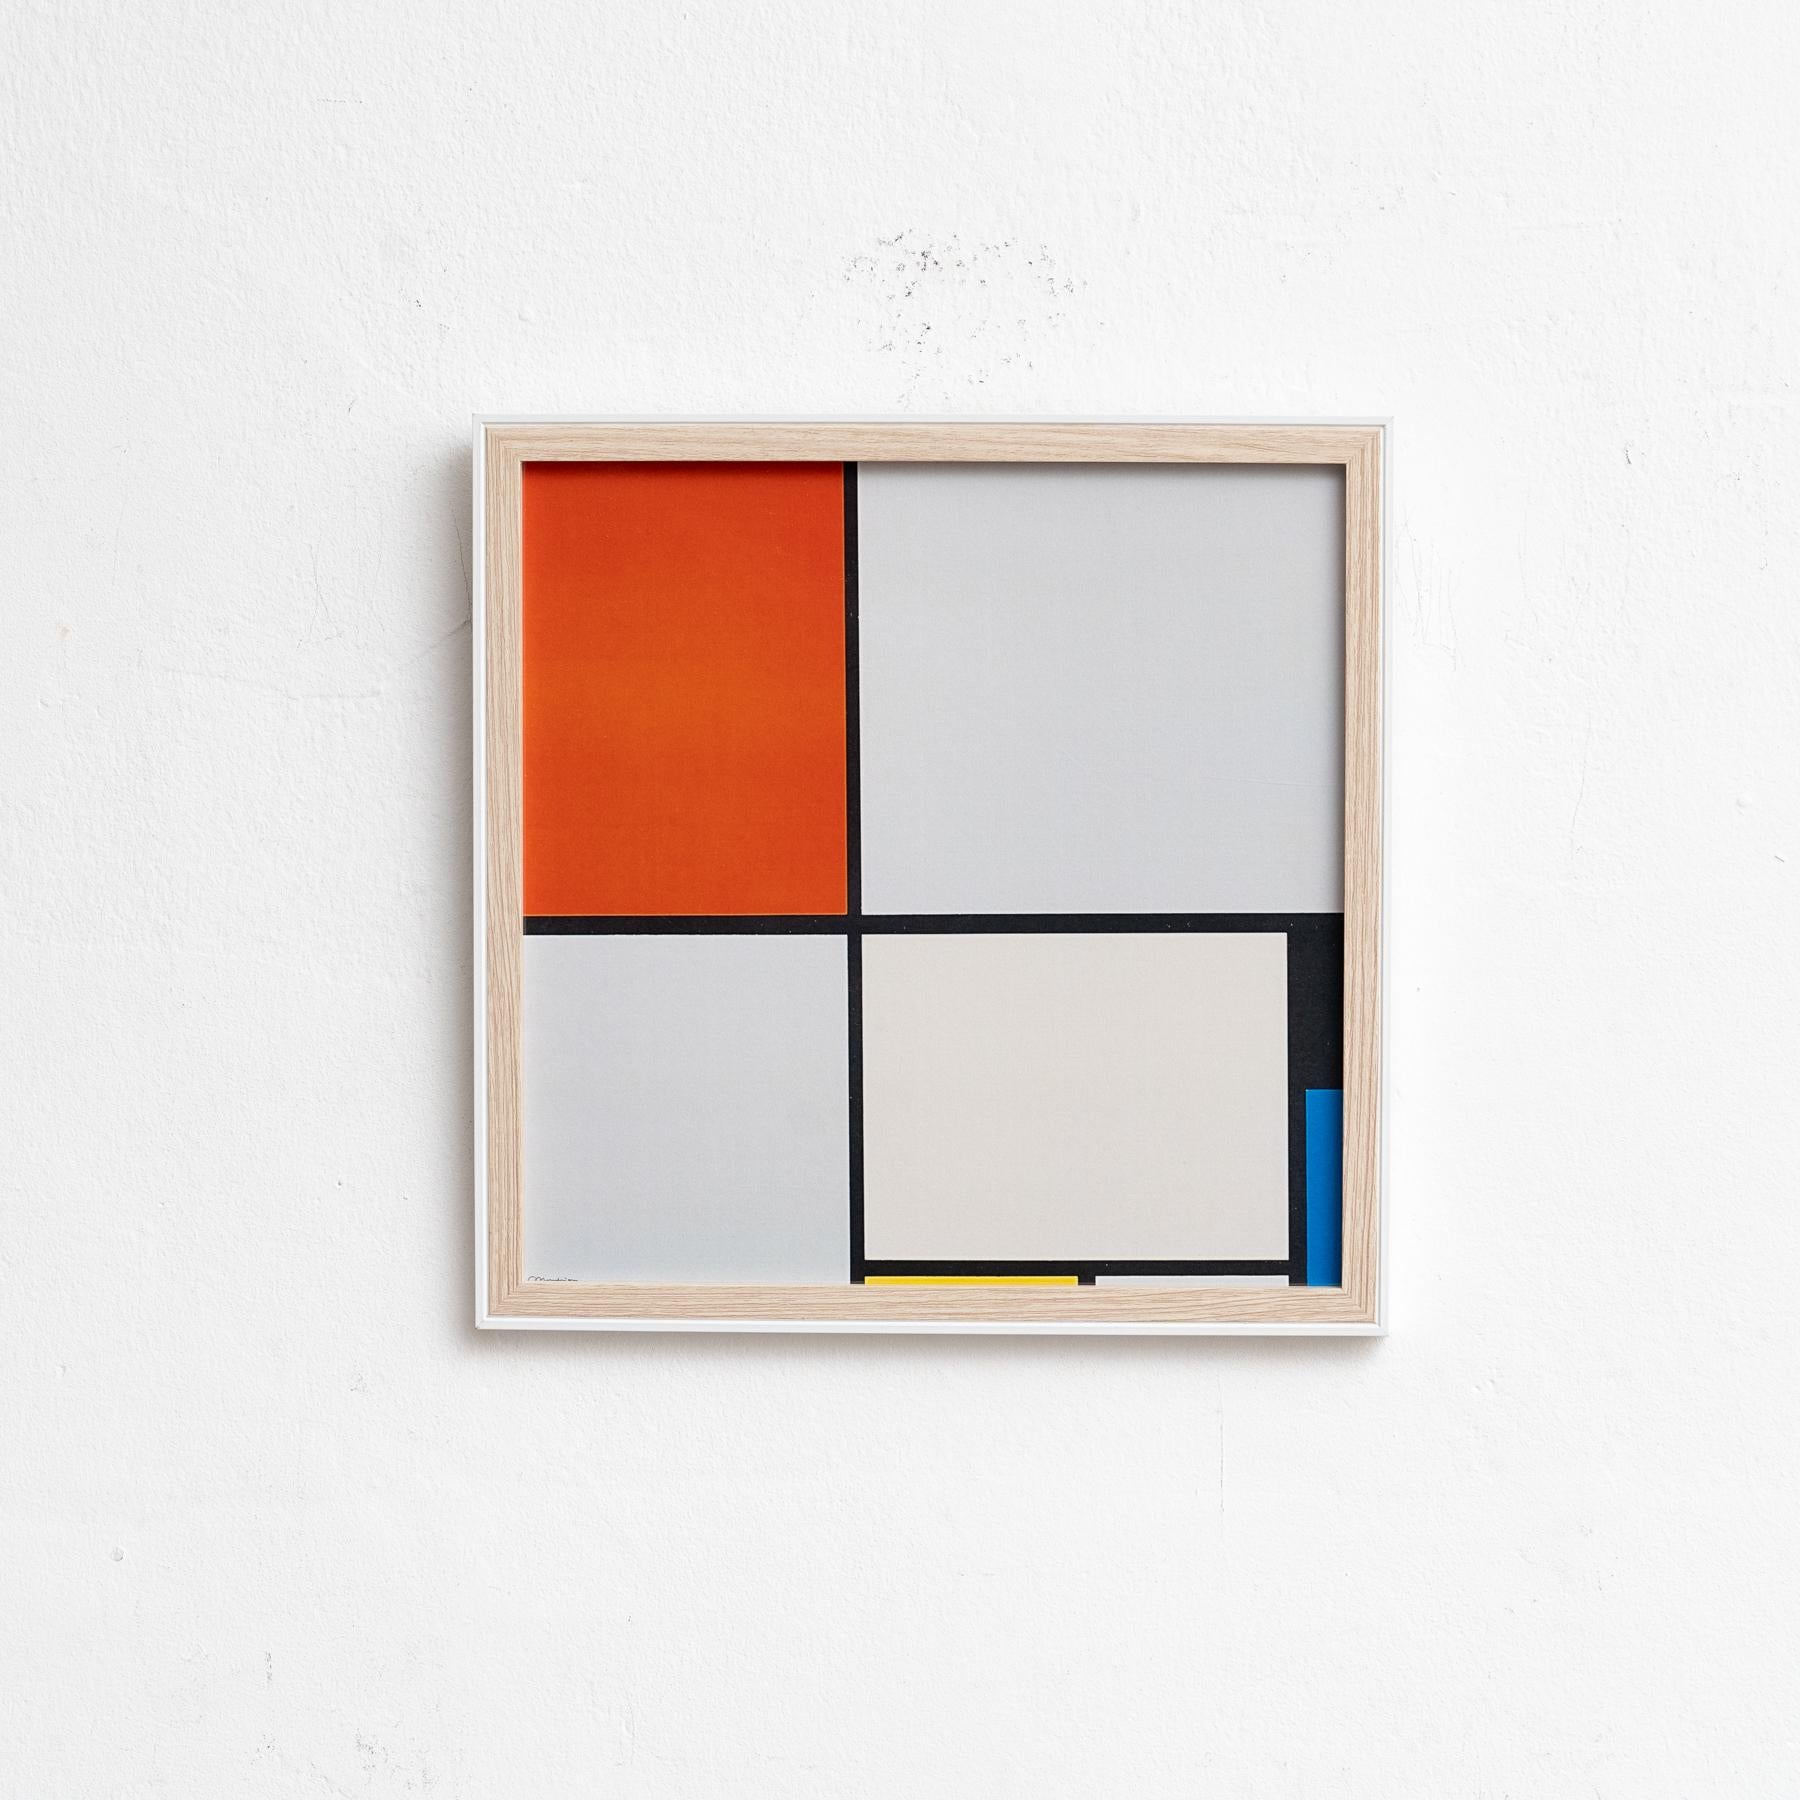 Piet Mondrian Late 20th Centry Framed Print

In original condition with minor wear consistent of age and use.